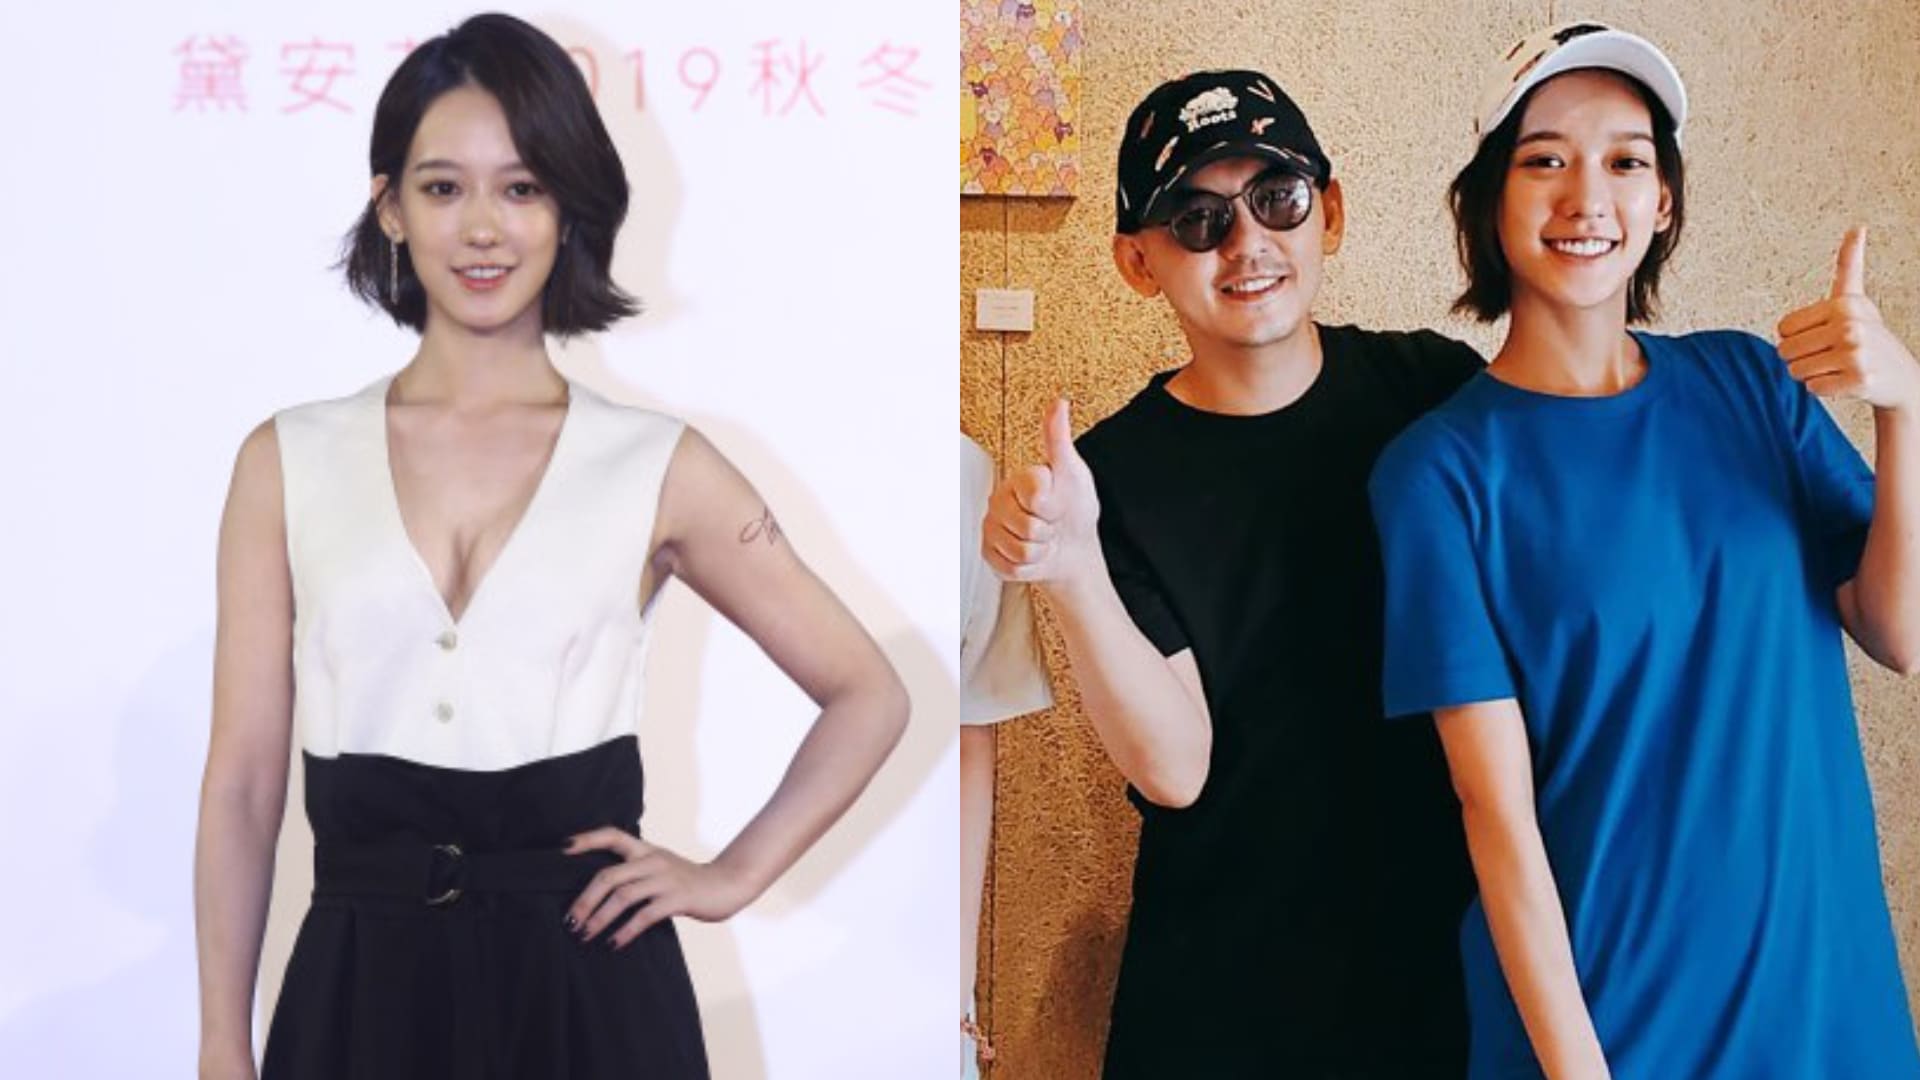 Summer Meng, Mickey Huang settle wedding arguments in 10 minutes